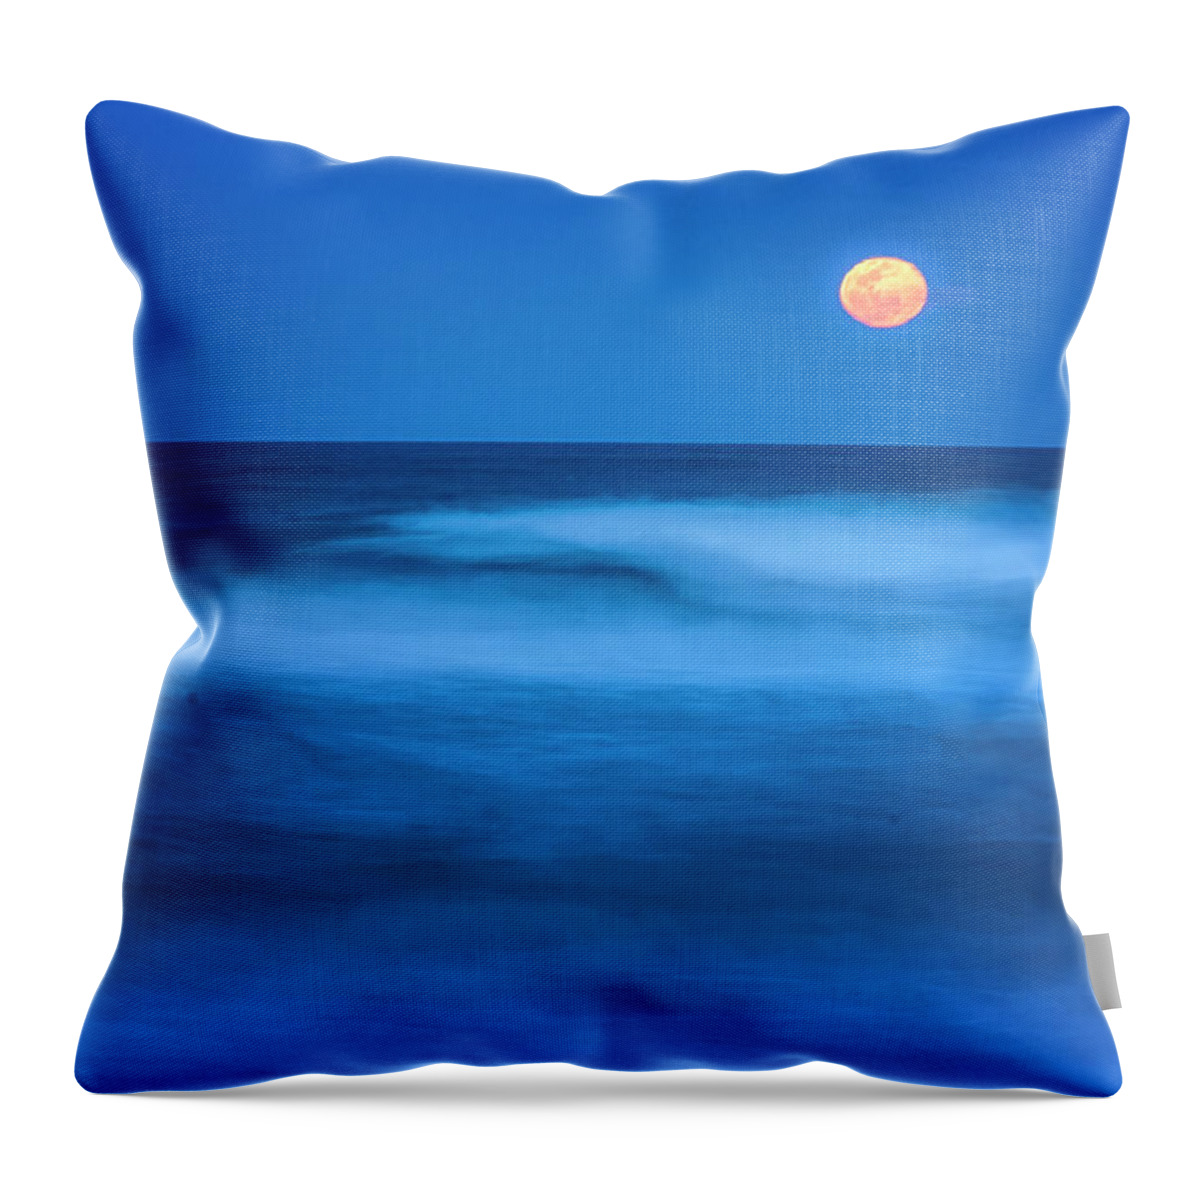 Yard Animals Throw Pillow featuring the photograph New Smyrna Beach Full Moon by Tom Singleton